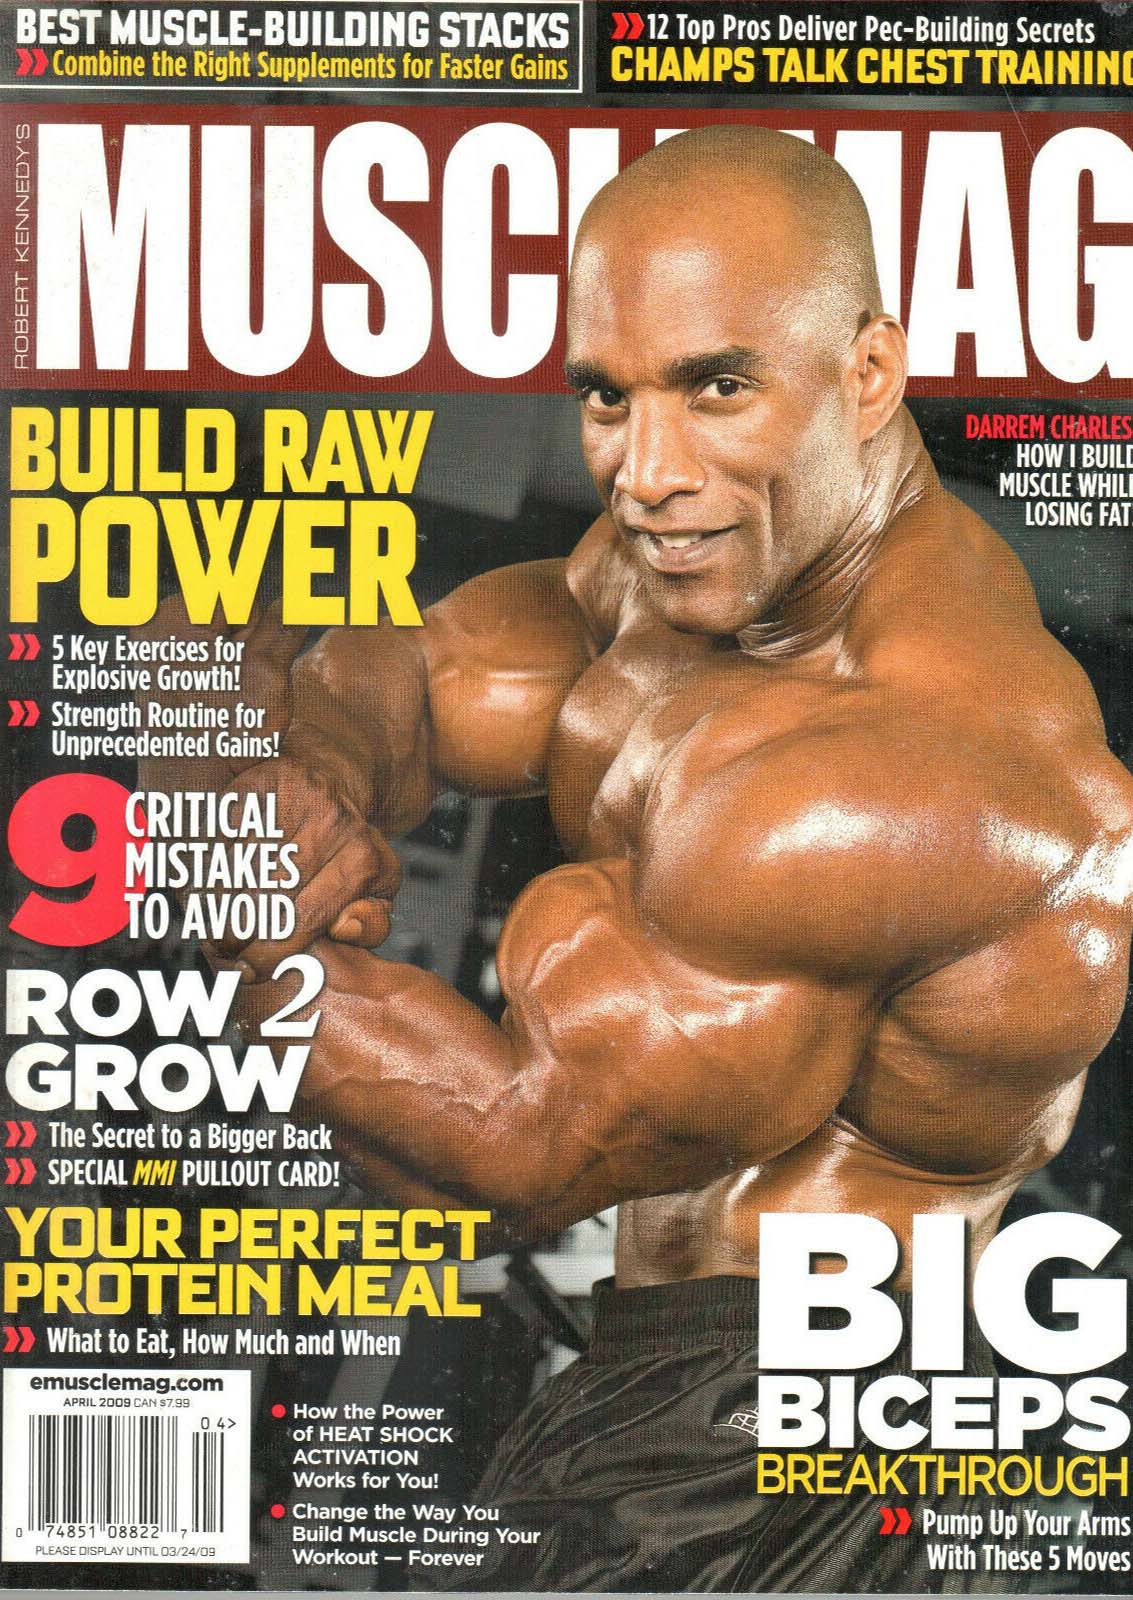 Muscle Mag April 2009 magazine back issue Muscle Mag magizine back copy Muscle Mag April 2009 Bodybuilding and Fitness Magazine Back Issue Published by Canadian Robert Kennedy and Founded in 1974. Best Muscle - Building Stacks Combine The Right Supplements For Faster Gains.